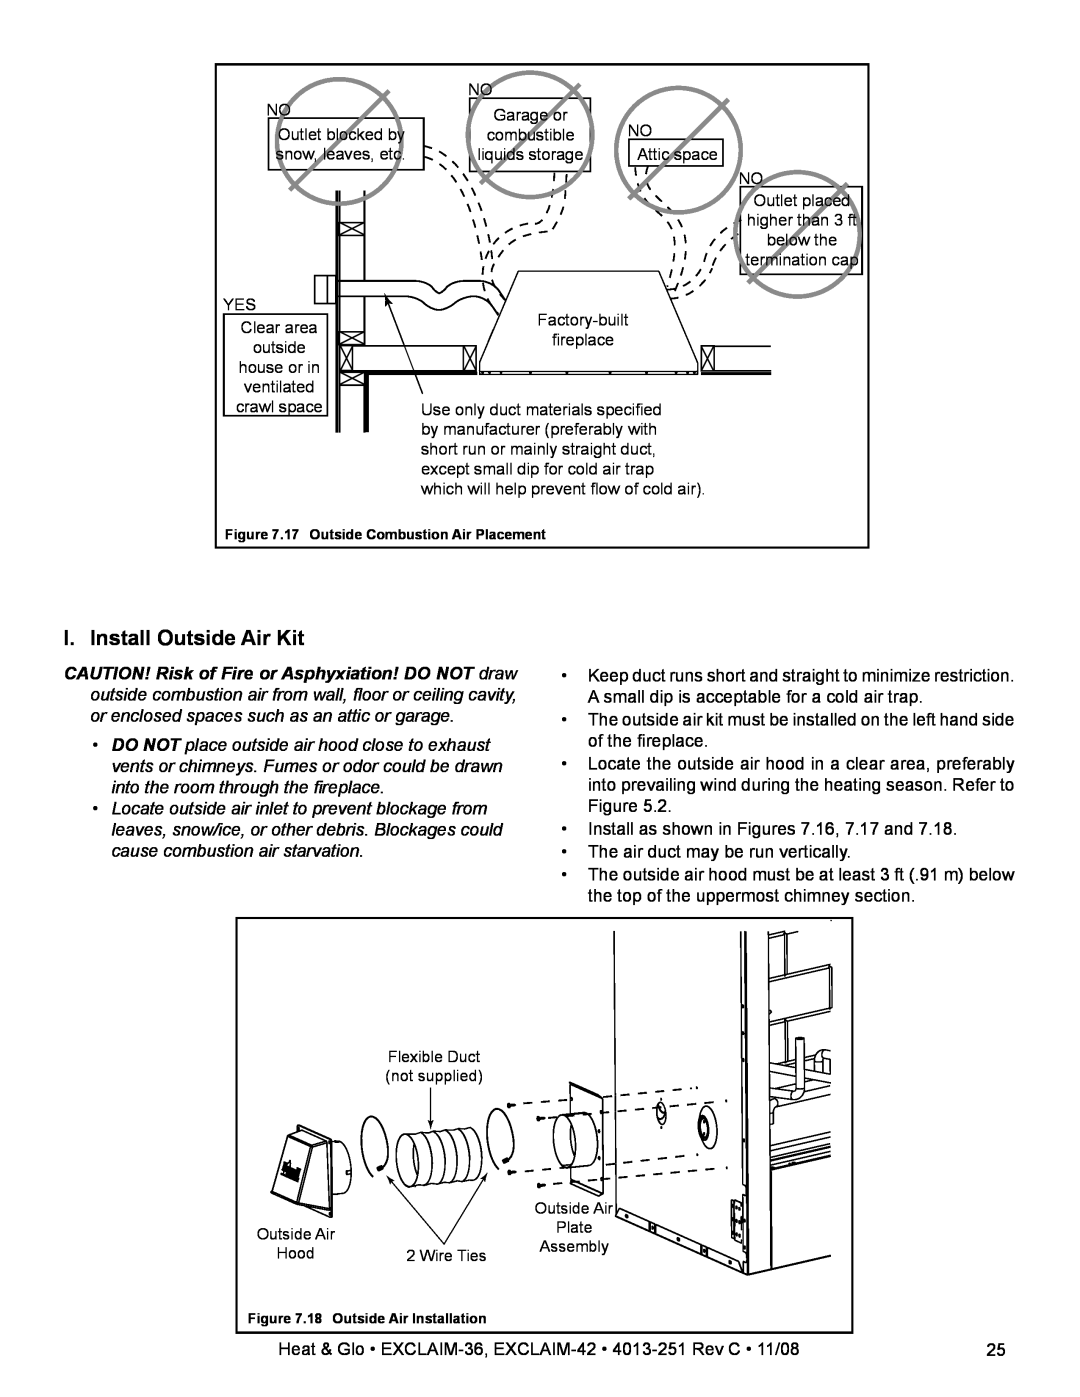 Hearth and Home Technologies EXCLAIM-36 owner manual I. Install Outside Air Kit, 17 Outside Combustion Air Placement 